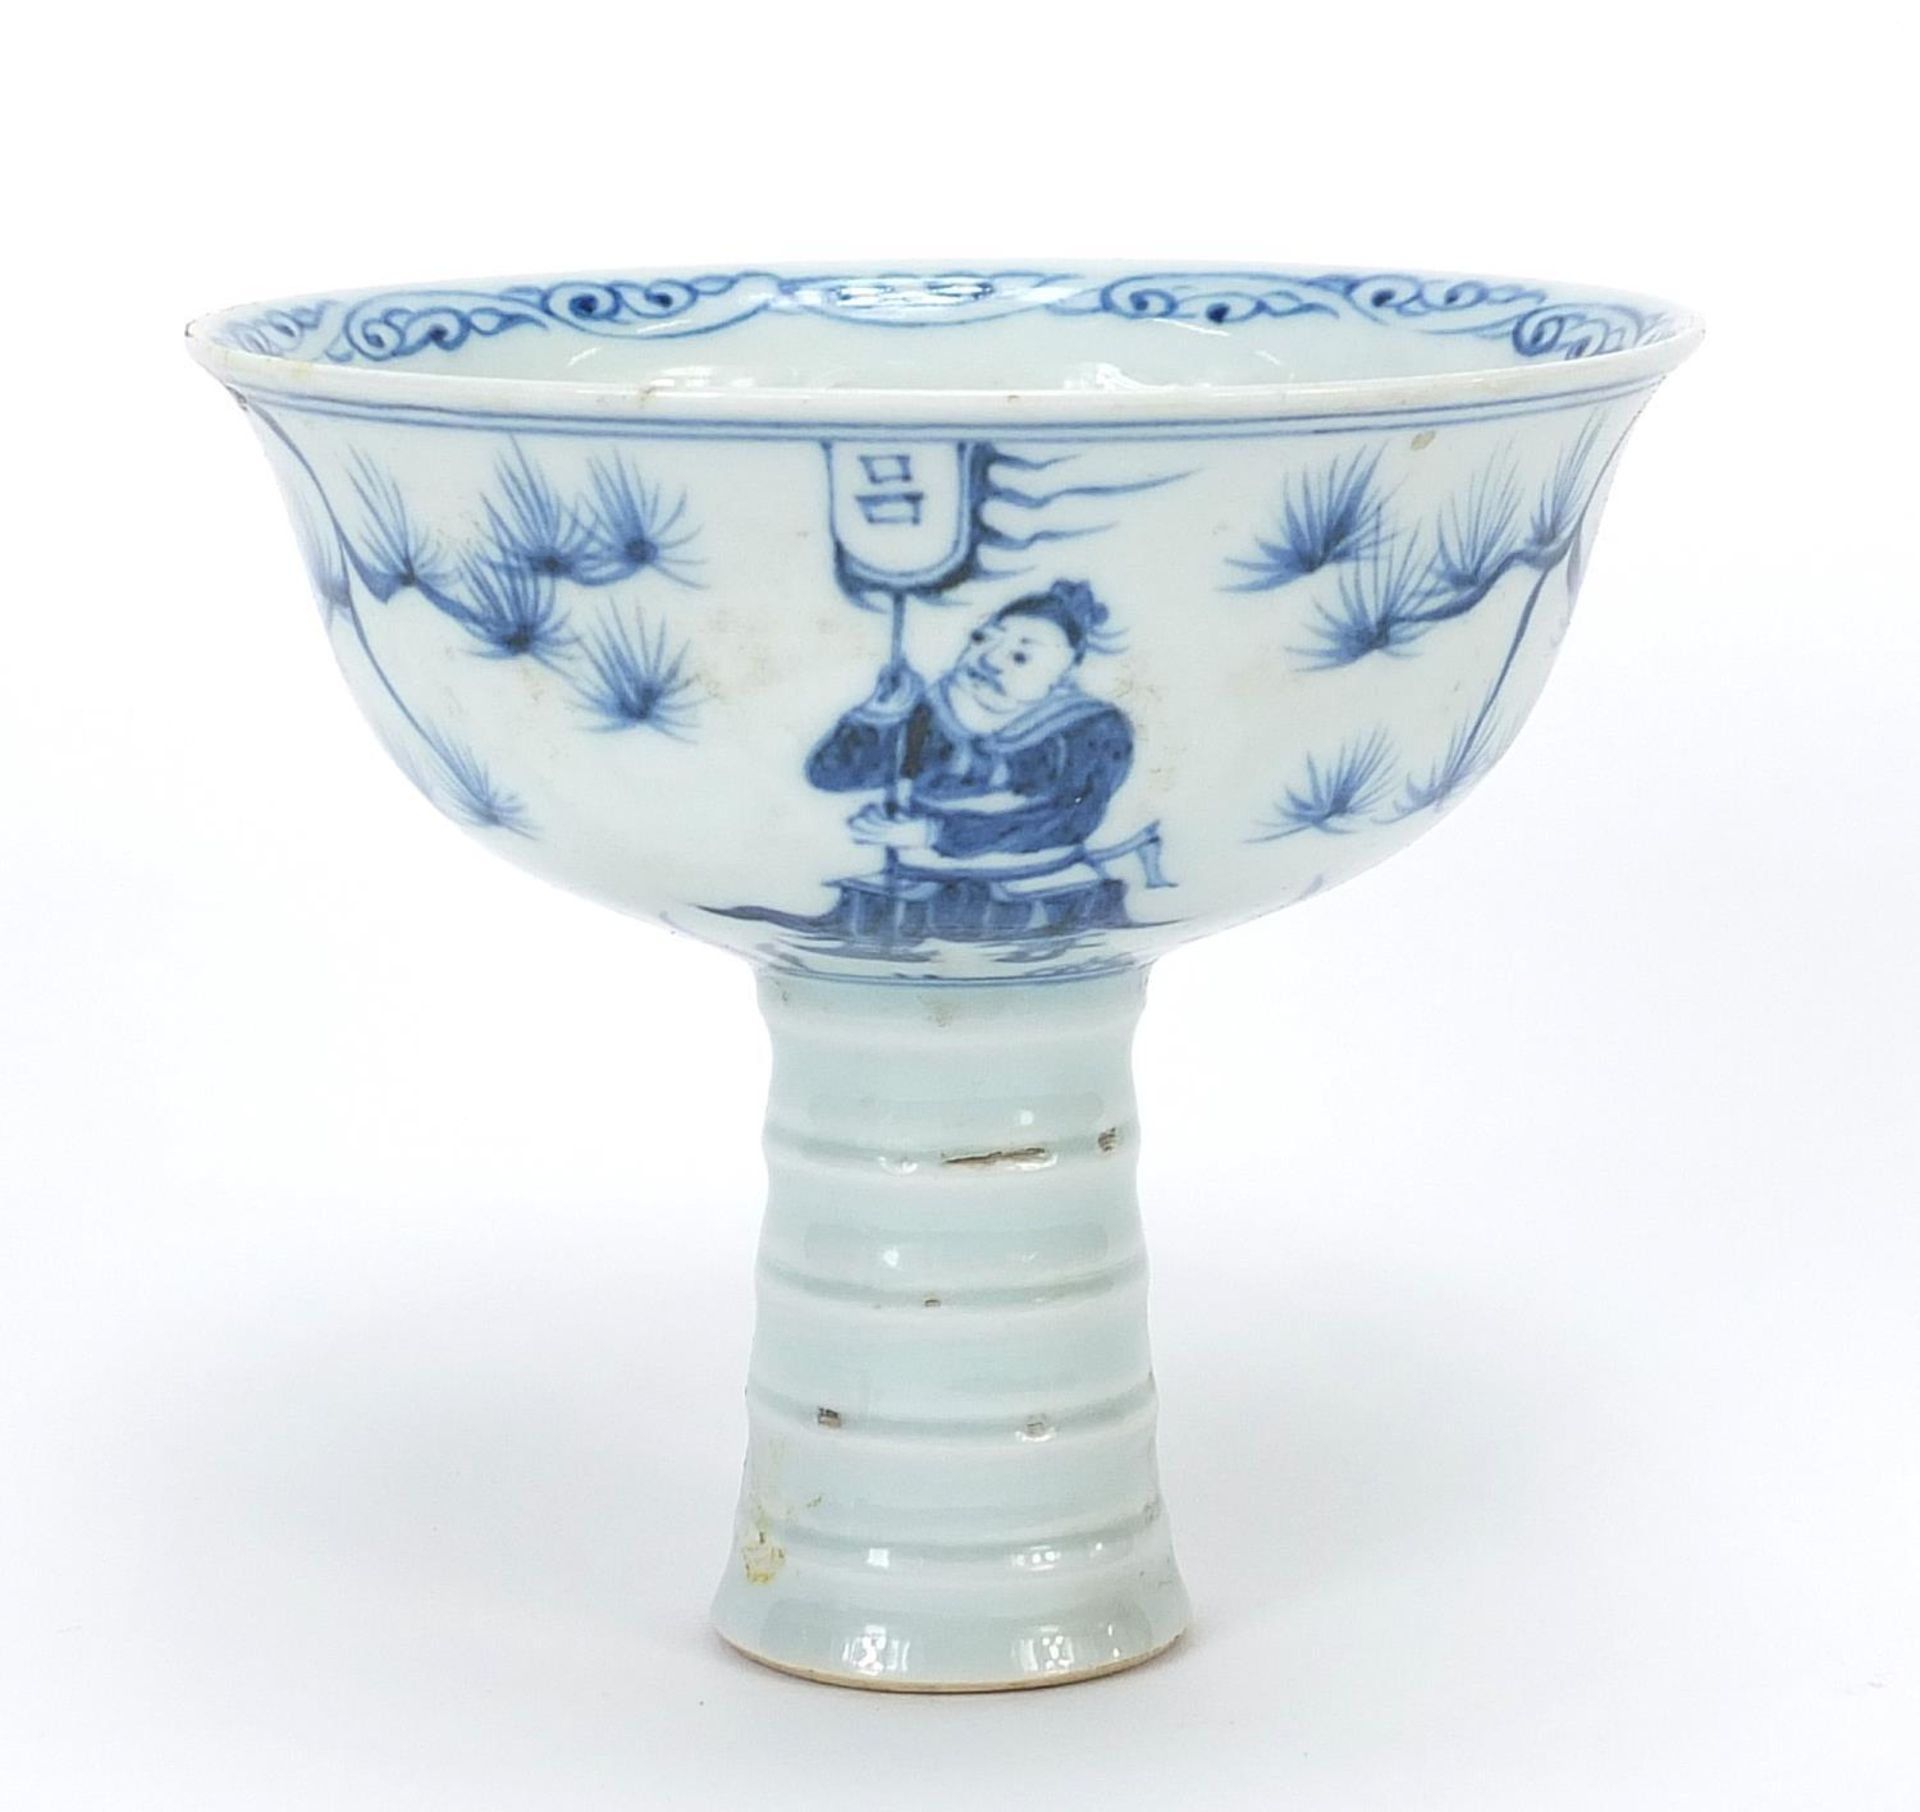 Chinese blue and white porcelain stem bowl hand painted with warriors, 11cm high x 12.5cm in